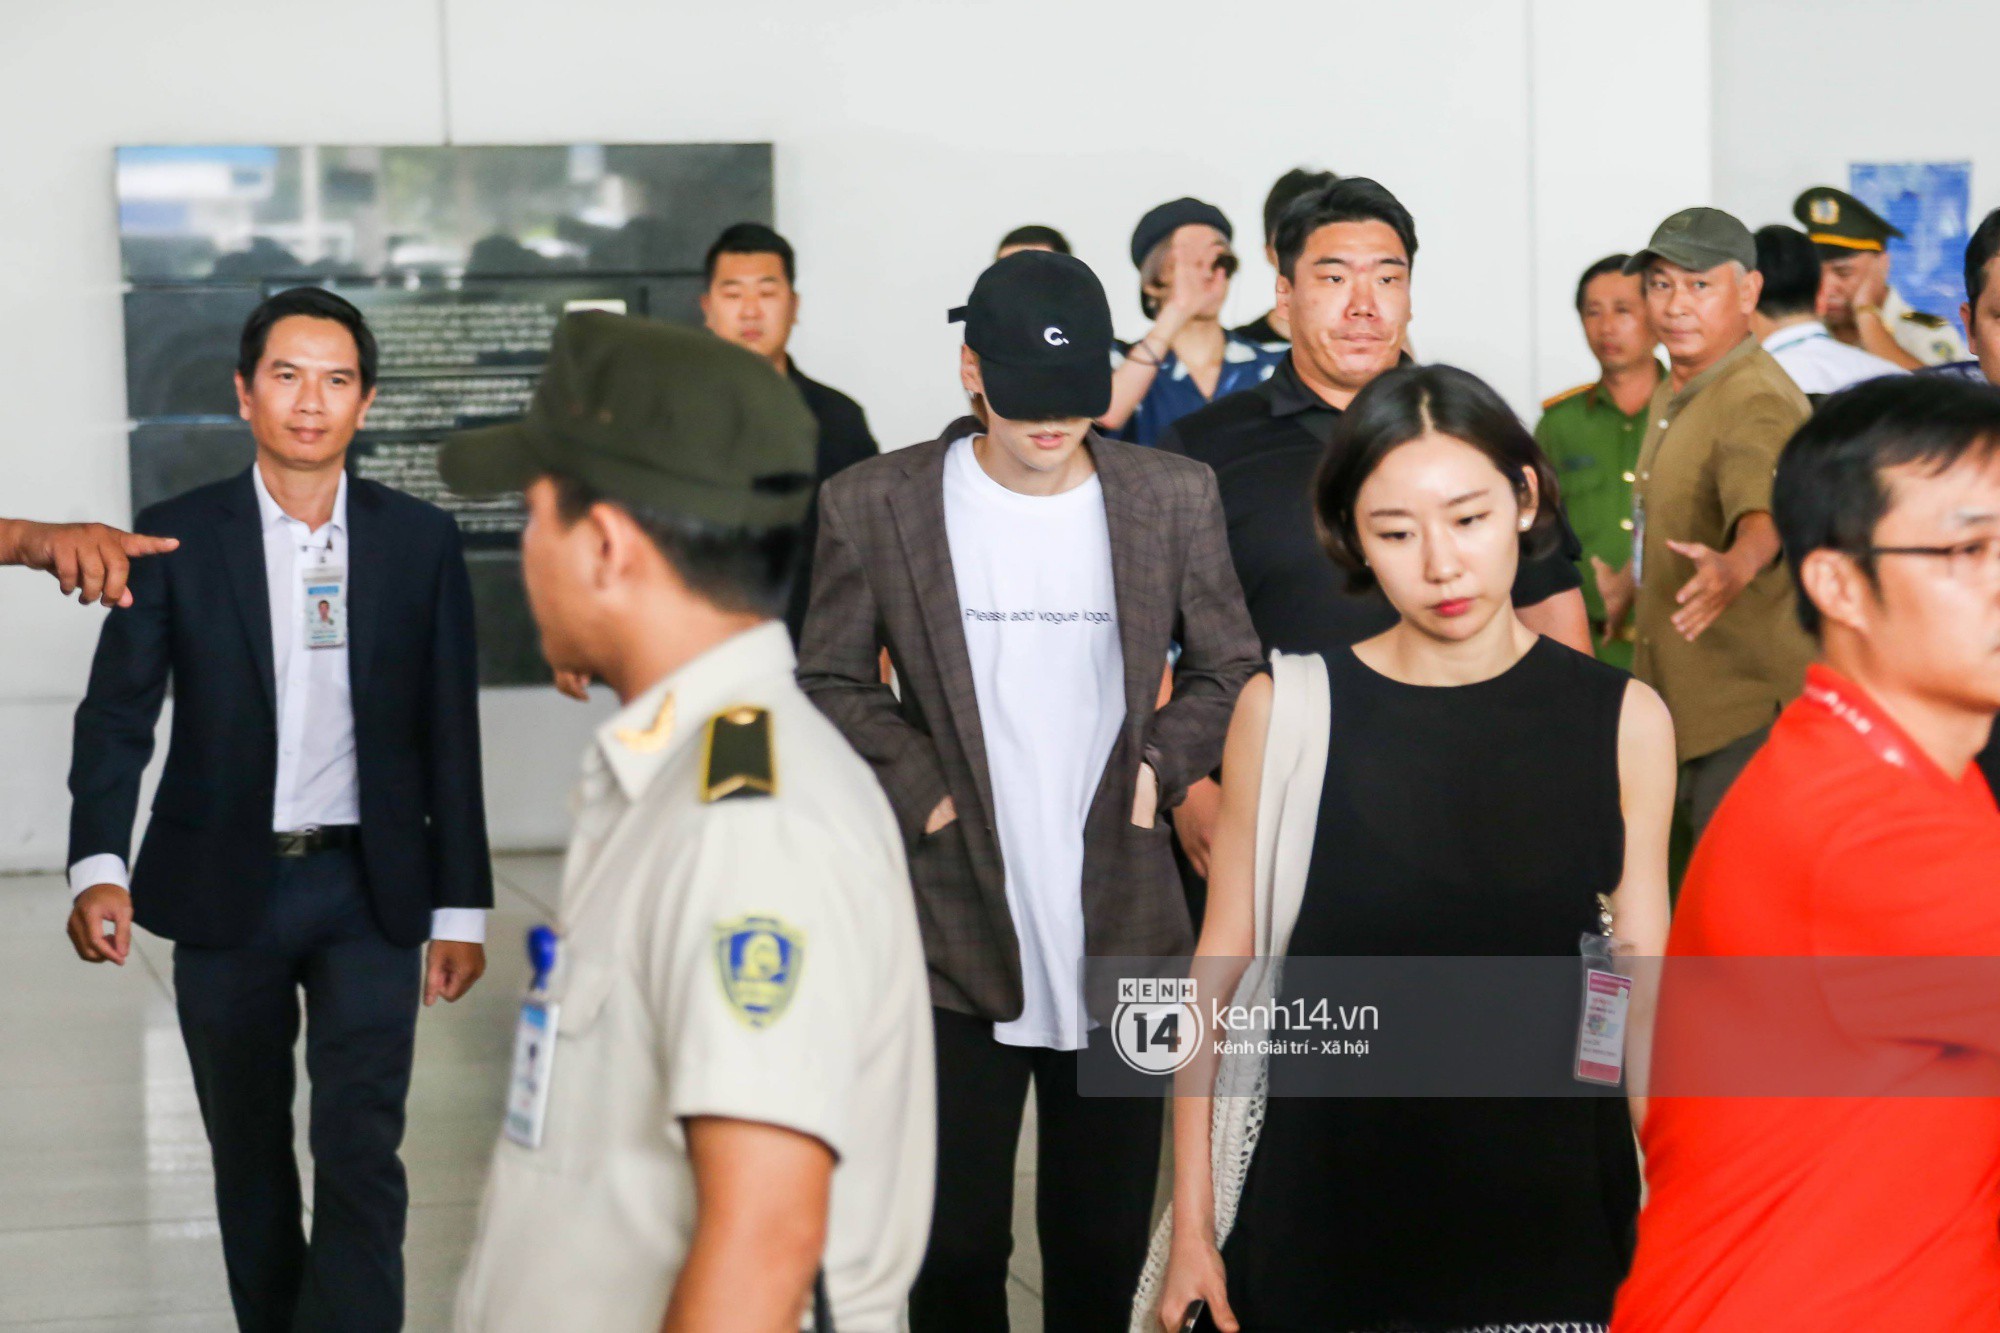 WINNER ensured that the airport of Tan Son Nhat fell apart, Mino had to remove the neck cracks but still cause a surprise because of the inverted shirt - Photo 1.